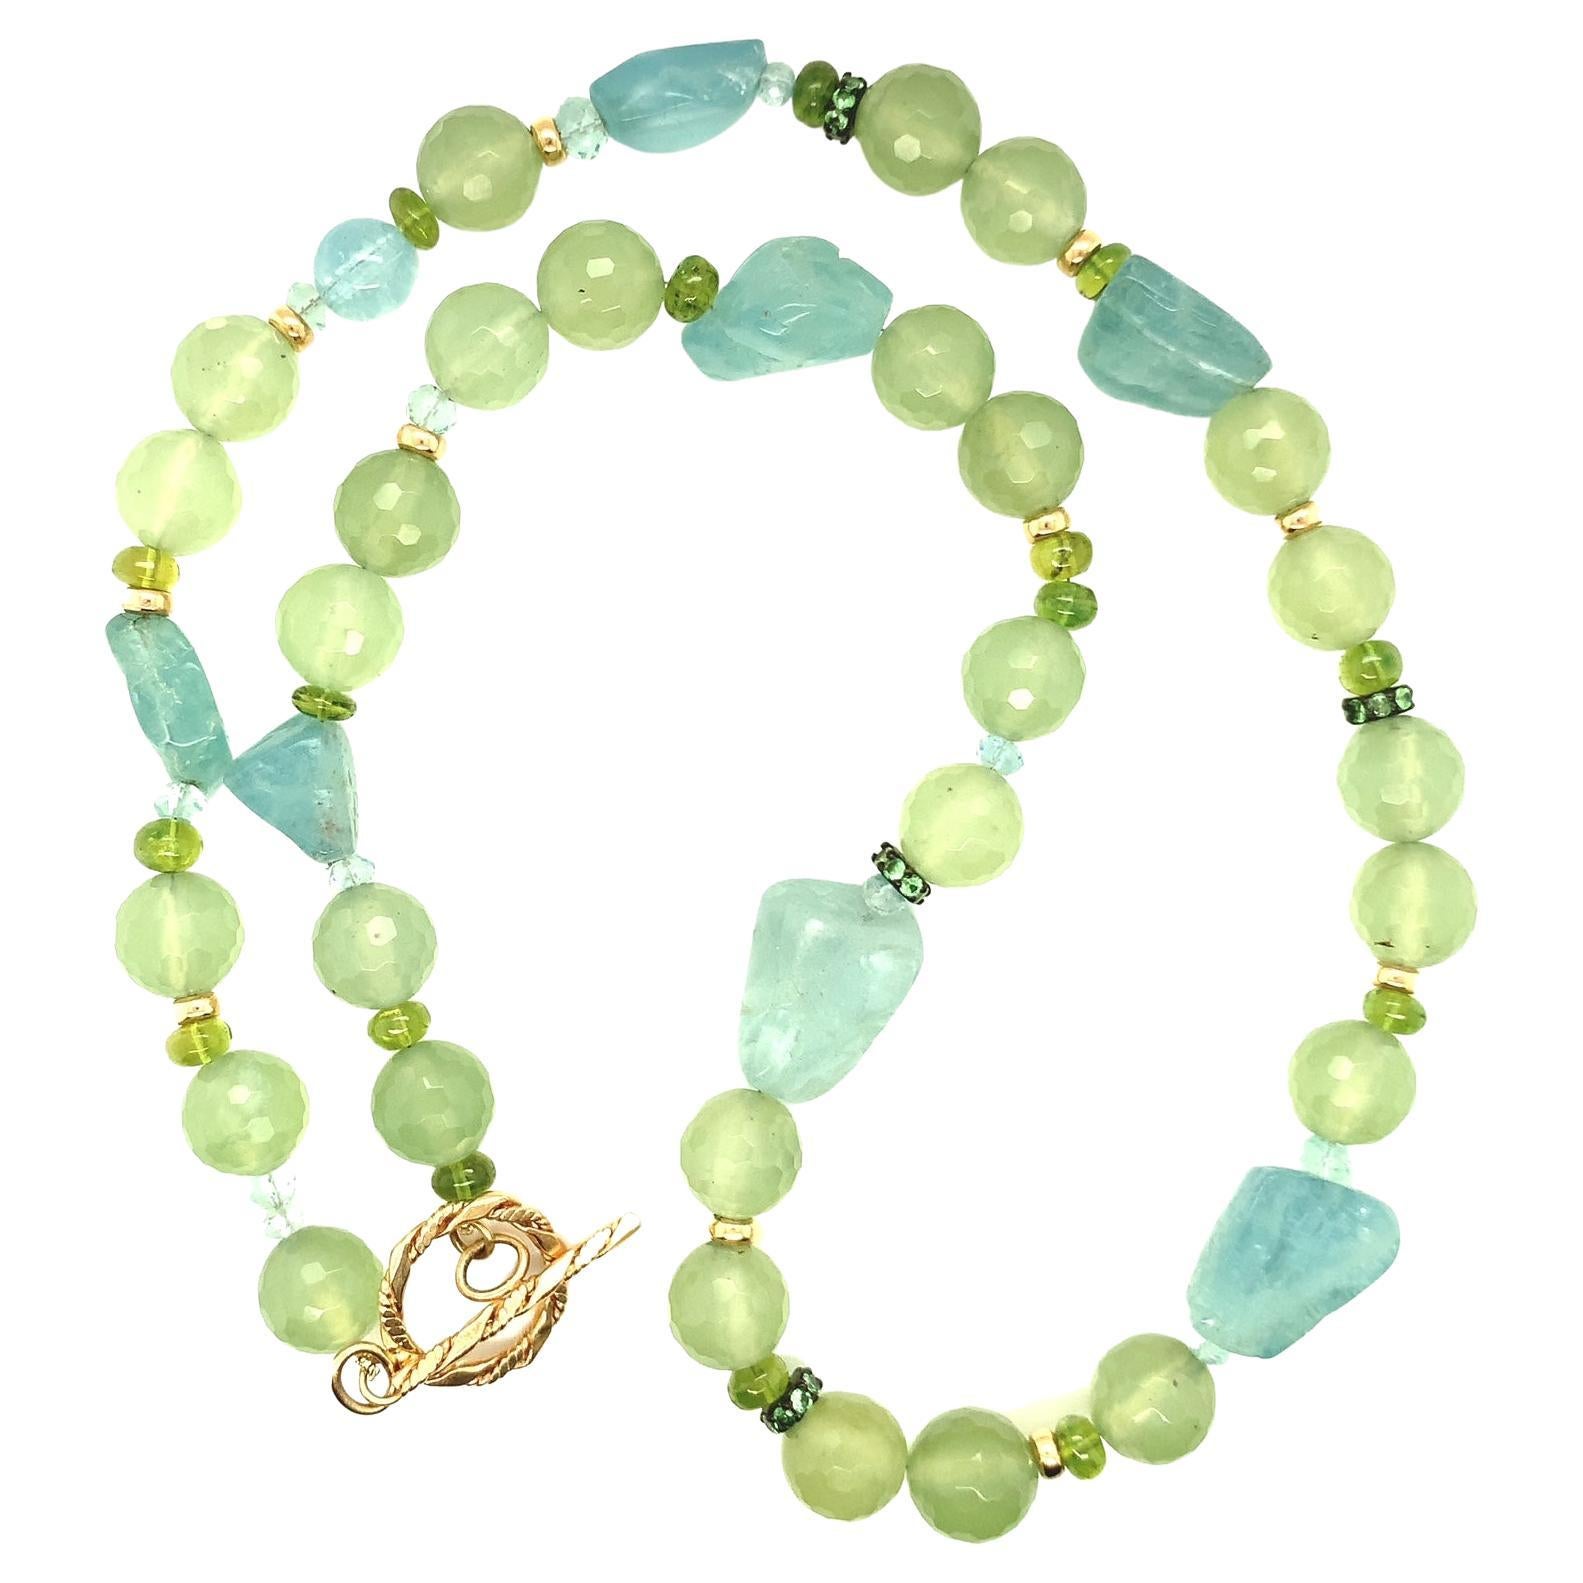 Aquamarine, Peridot, Phrenite and Tsavorite Beaded Necklace with Gold Accents For Sale